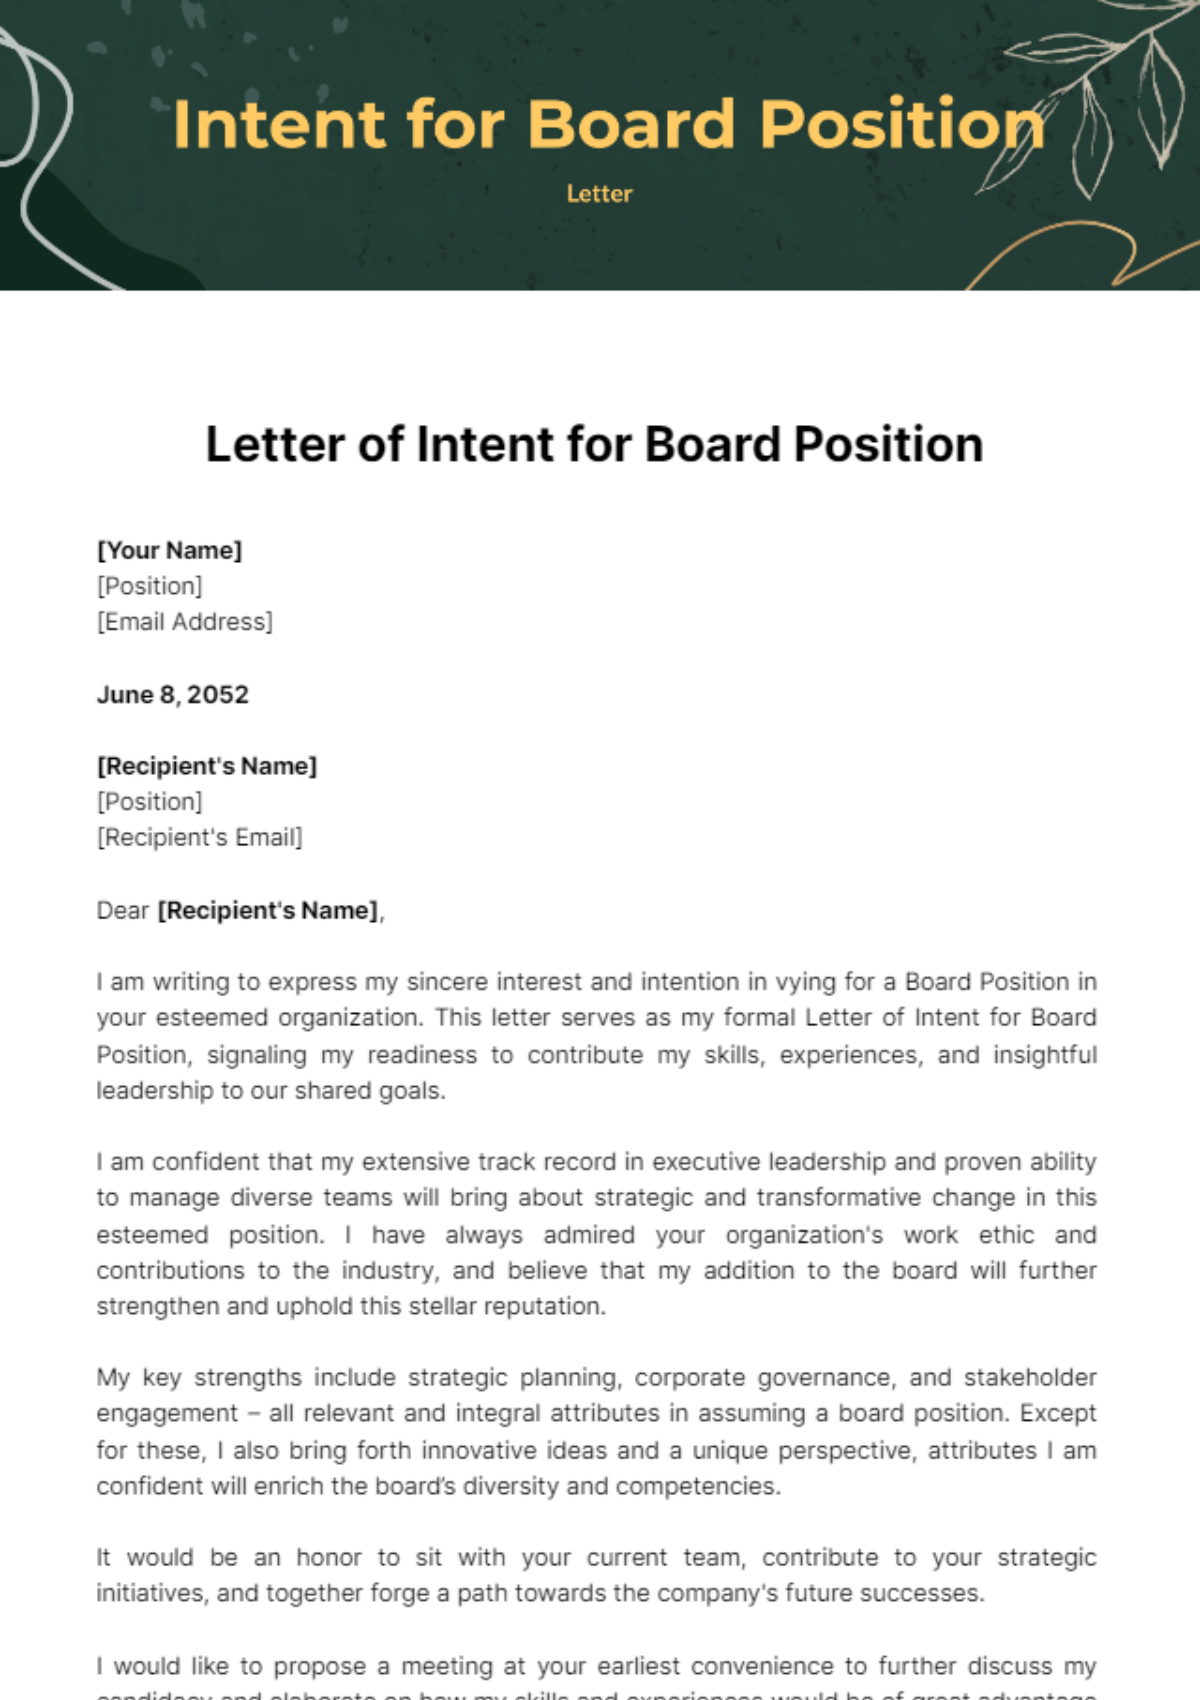 Letter of Intent for Board Position Template